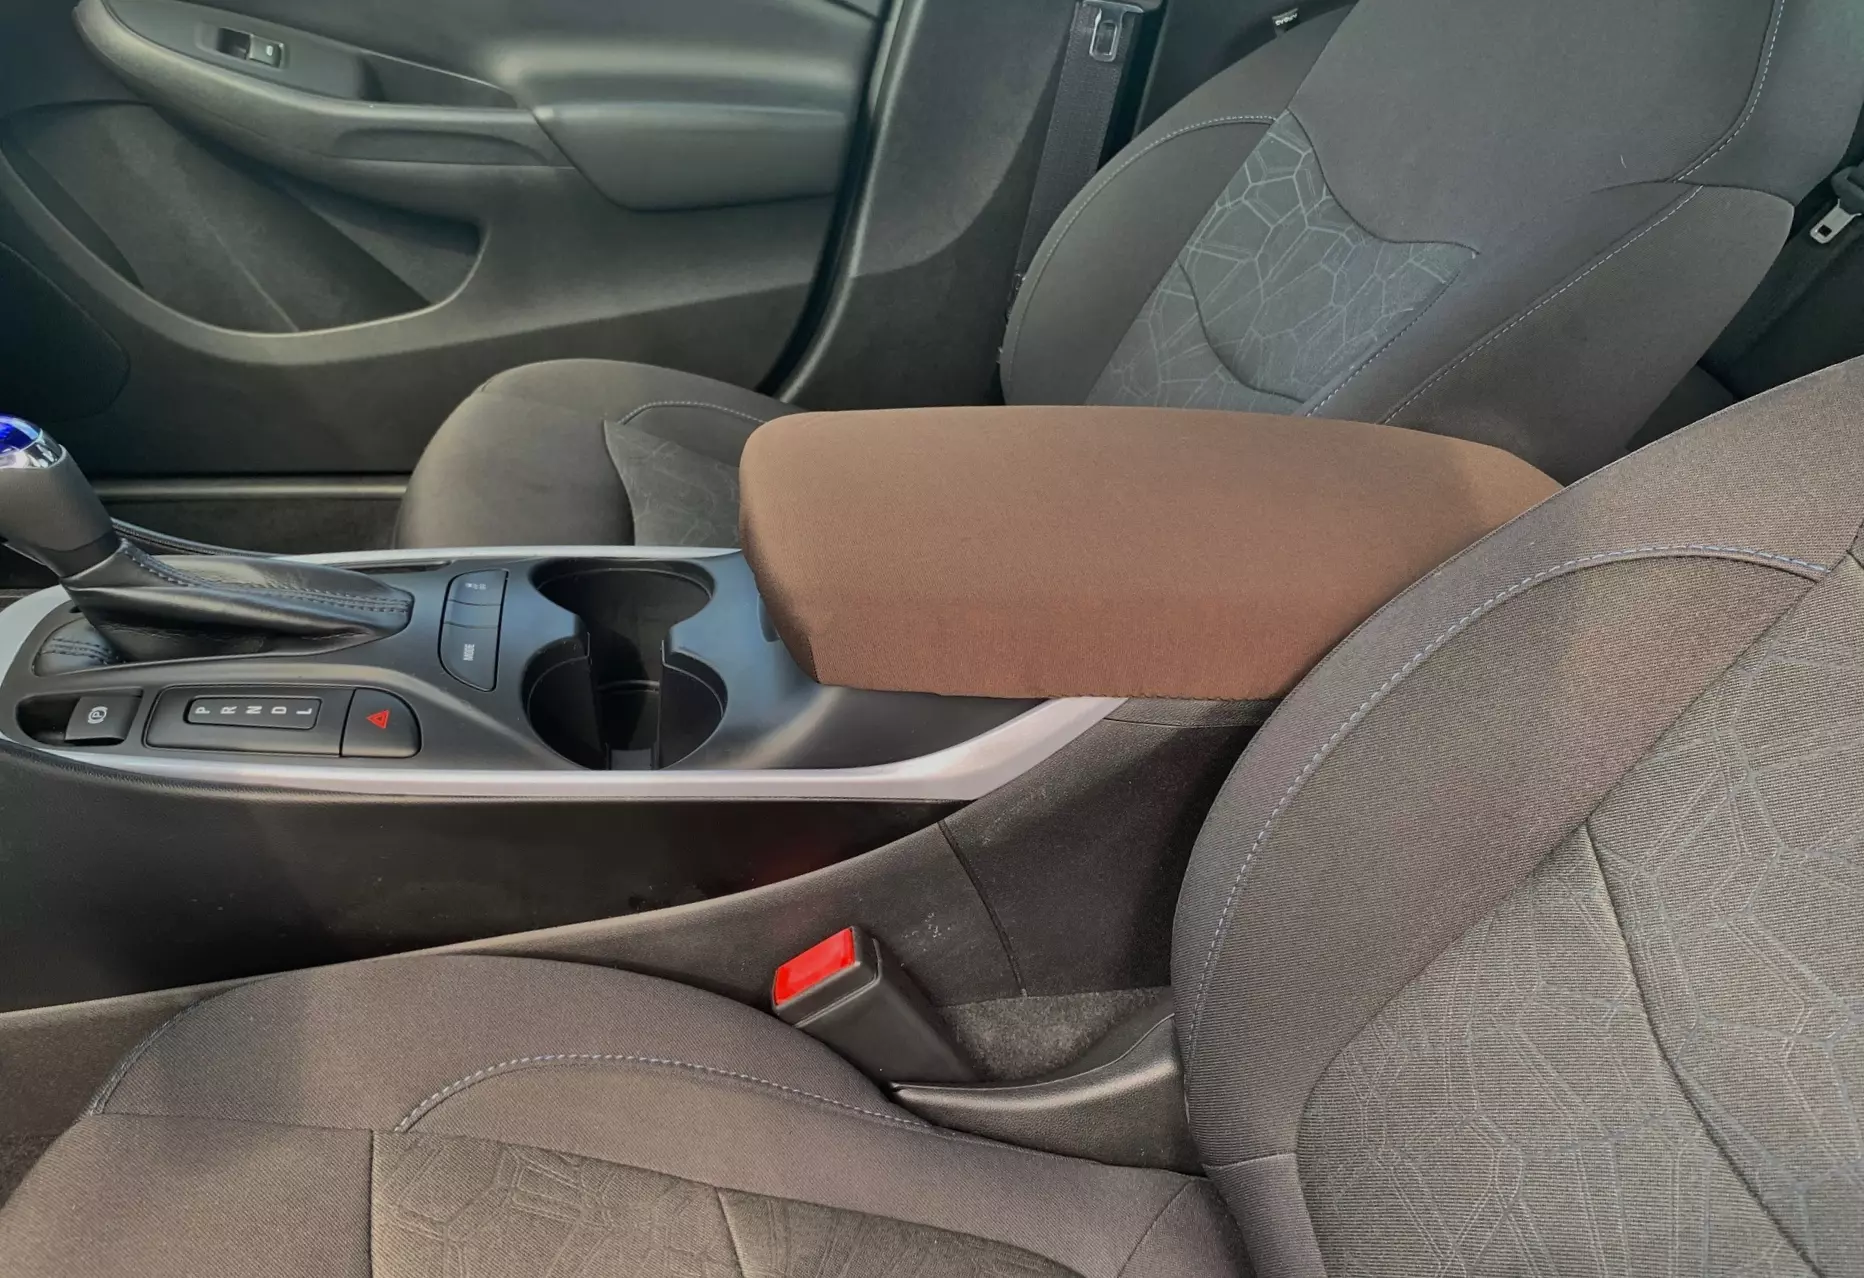 Buy Neoprene Center Console Cover Fits the Chevy Volt 2011-2014